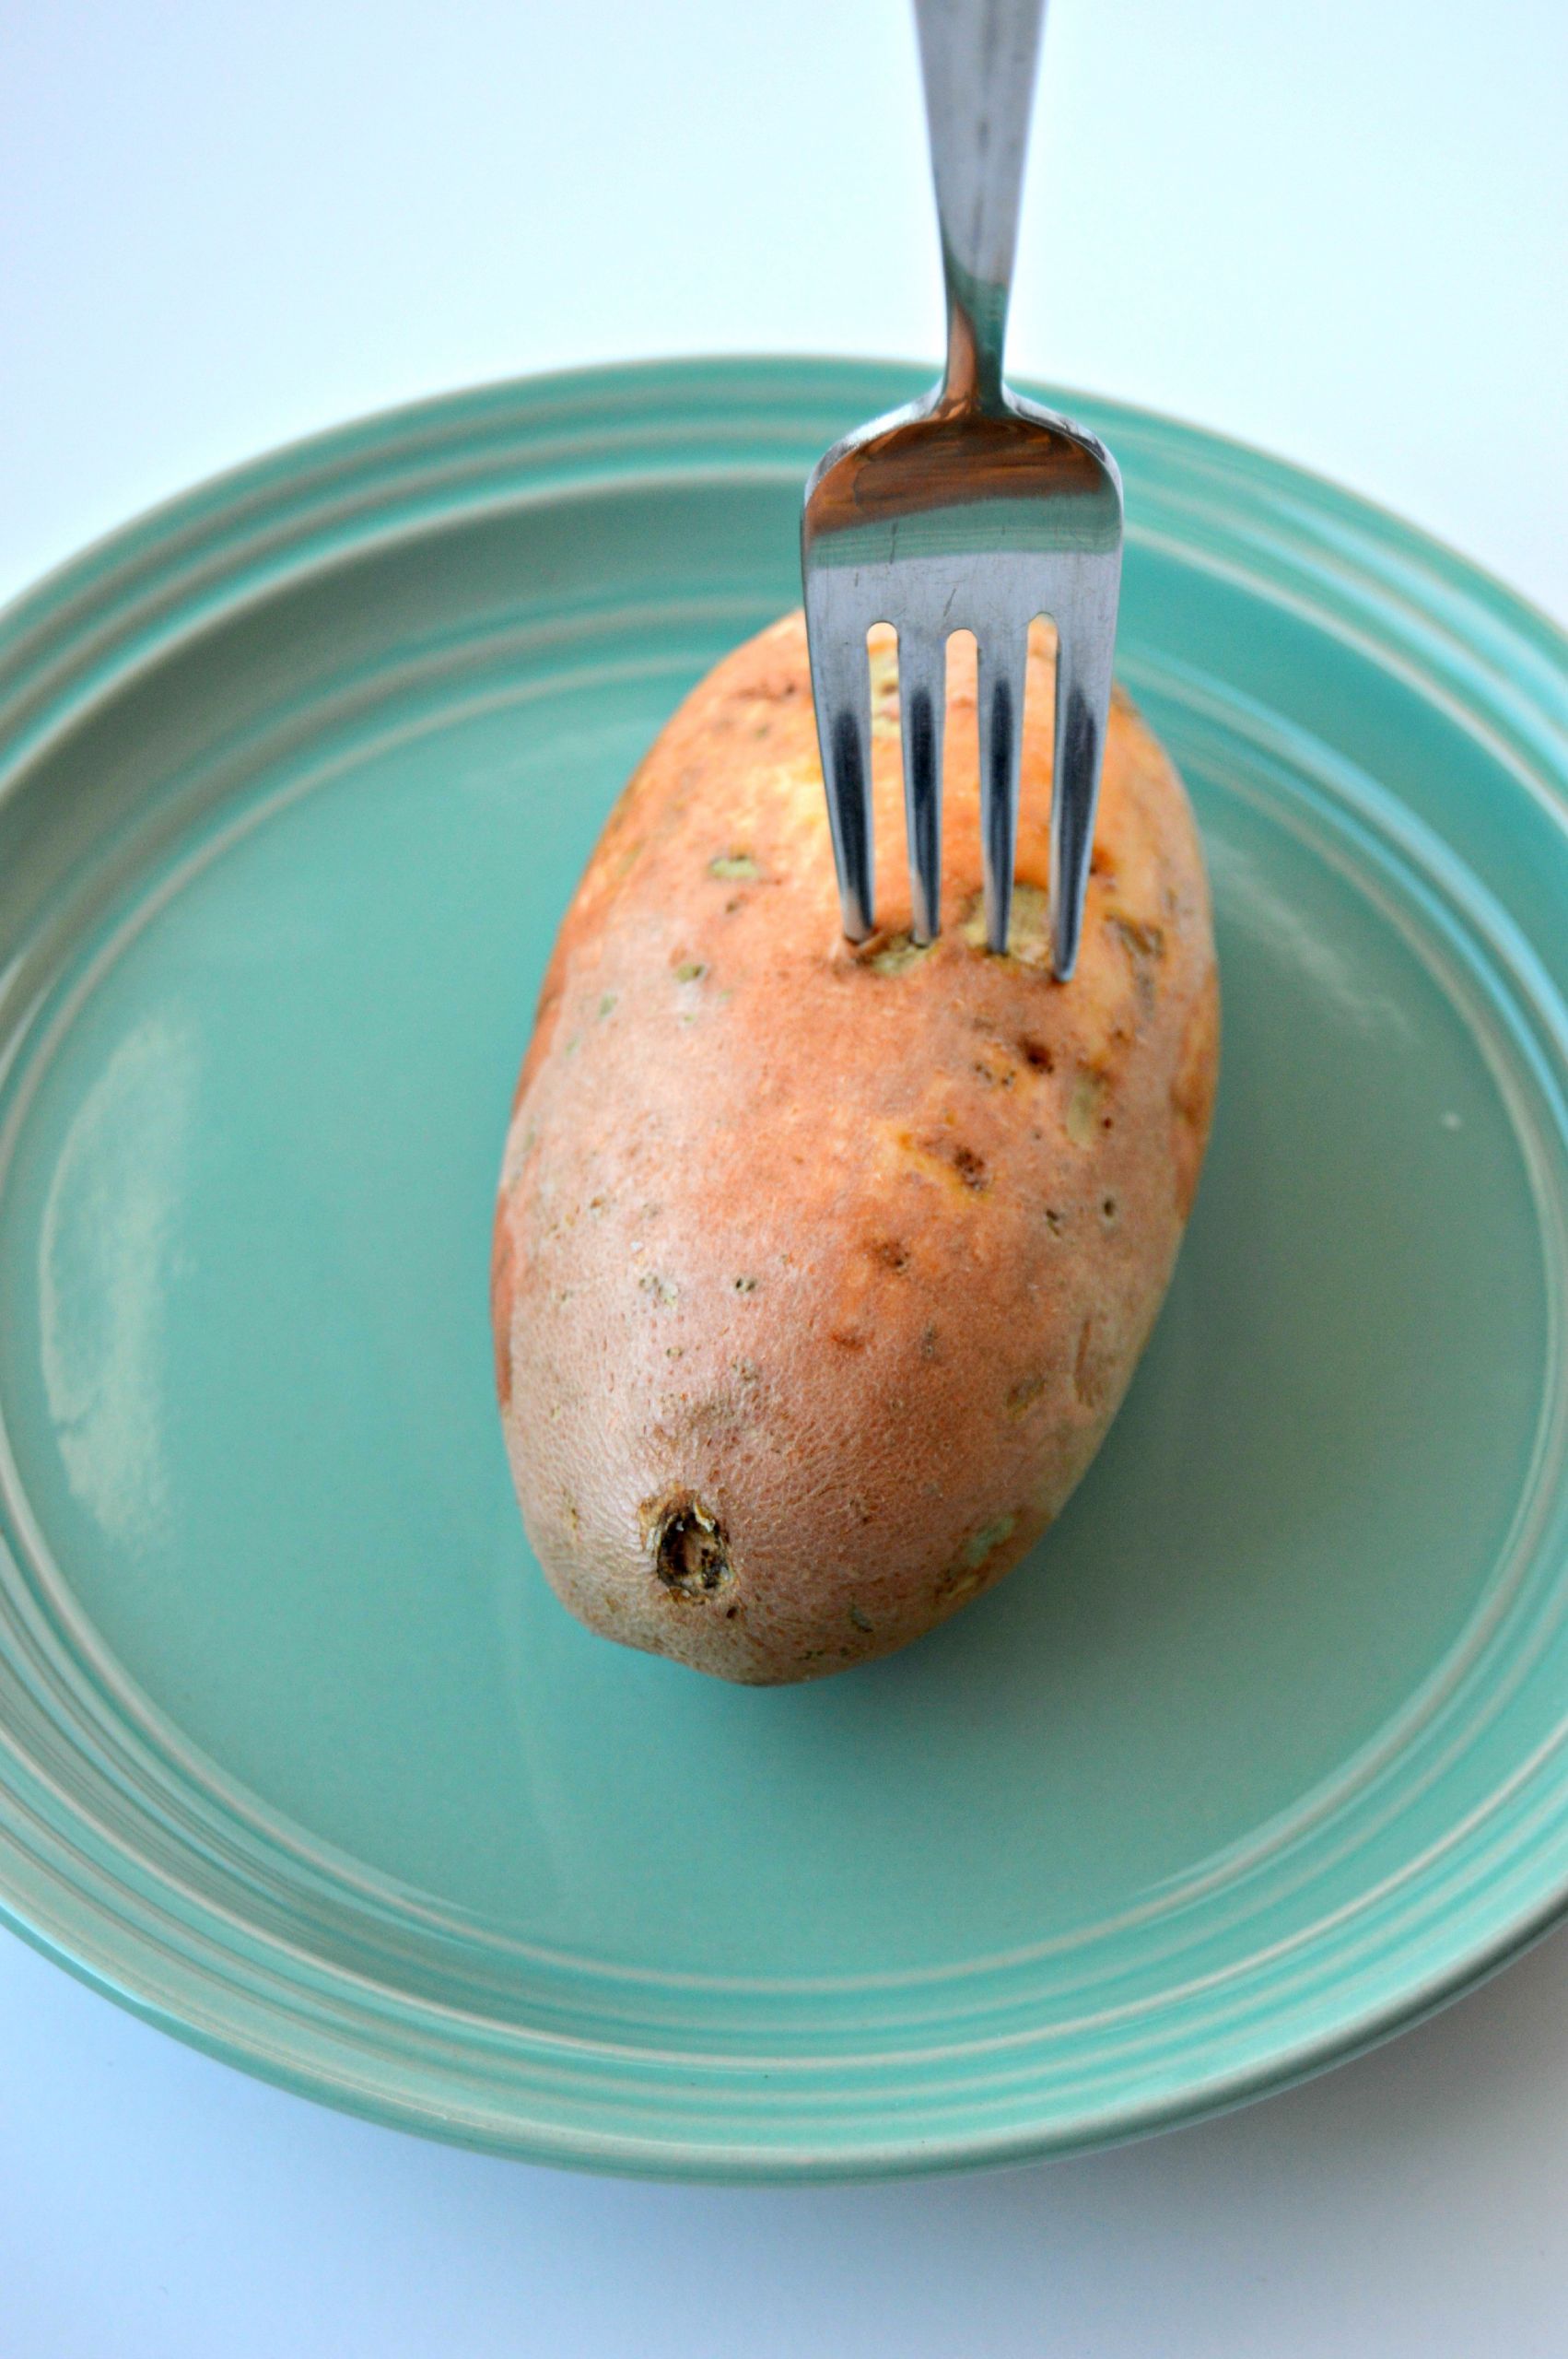 Cook Sweet Potato In Microwave
 How to Make a Baked Sweet Potato in the Microwave Clean